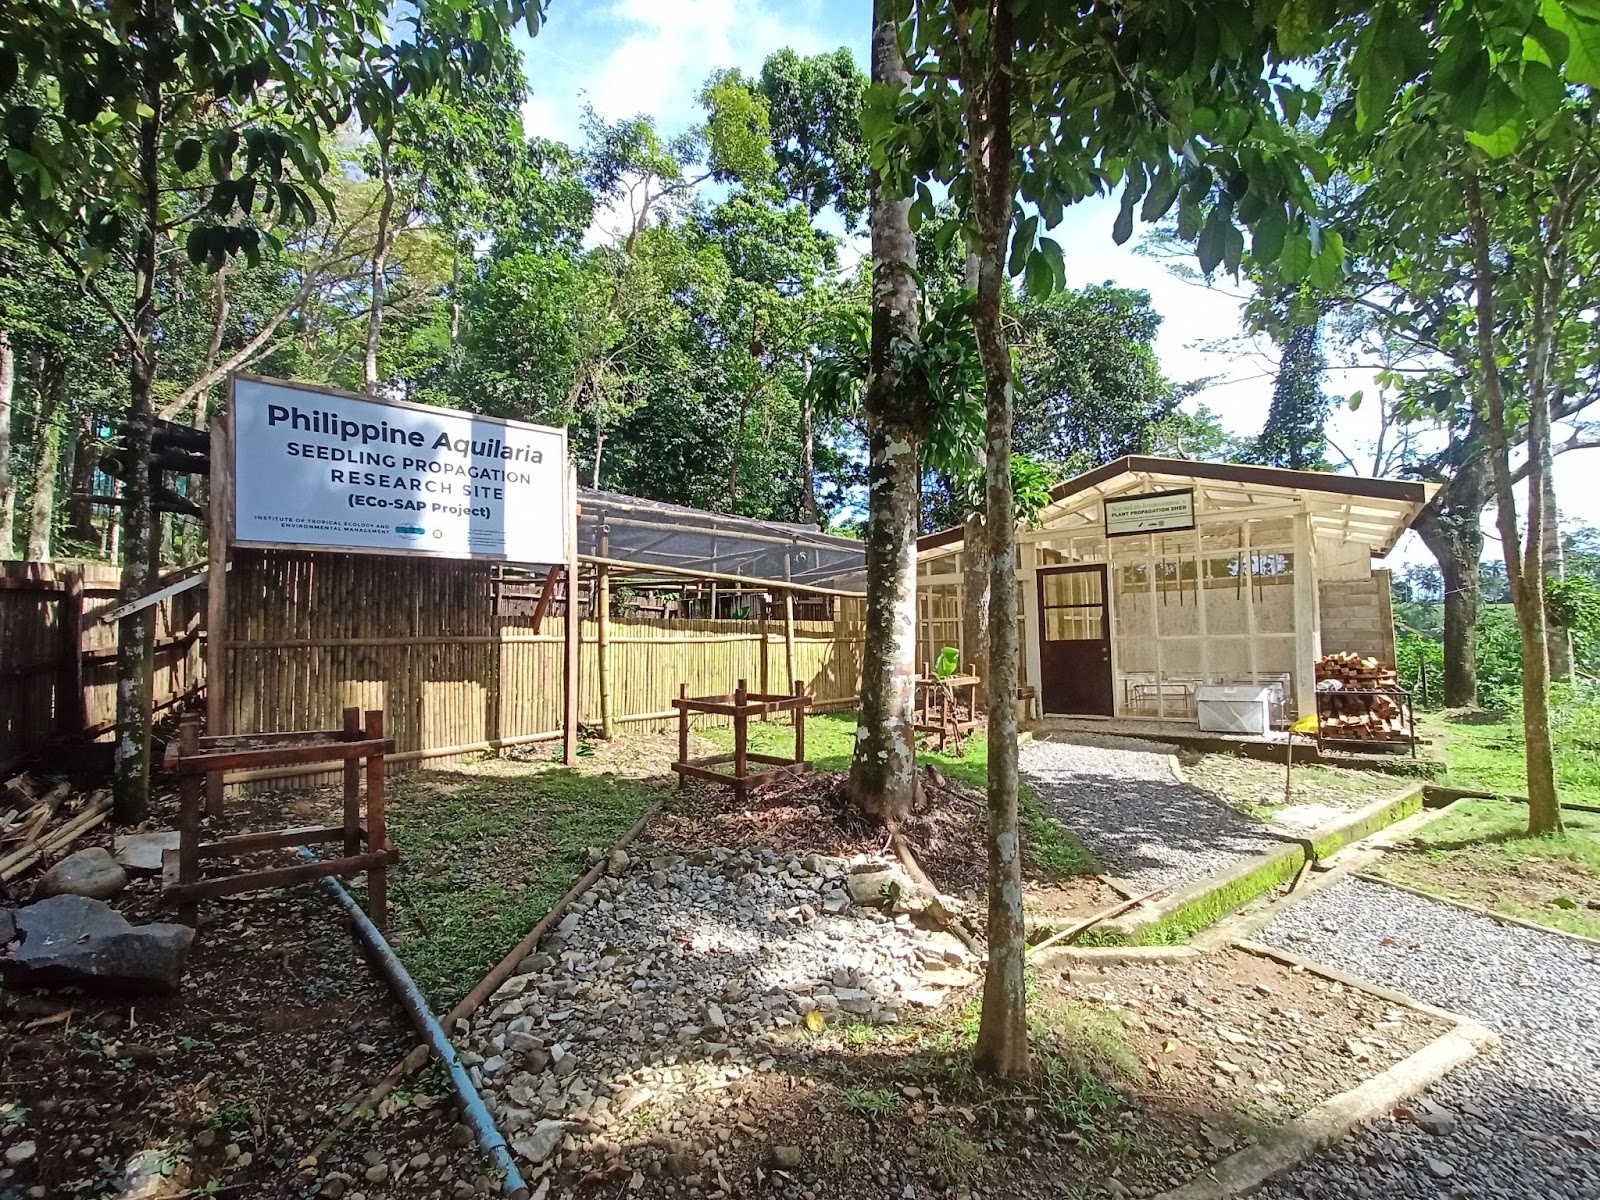 Philippine Aquilaria Seedling Propagation Research Site